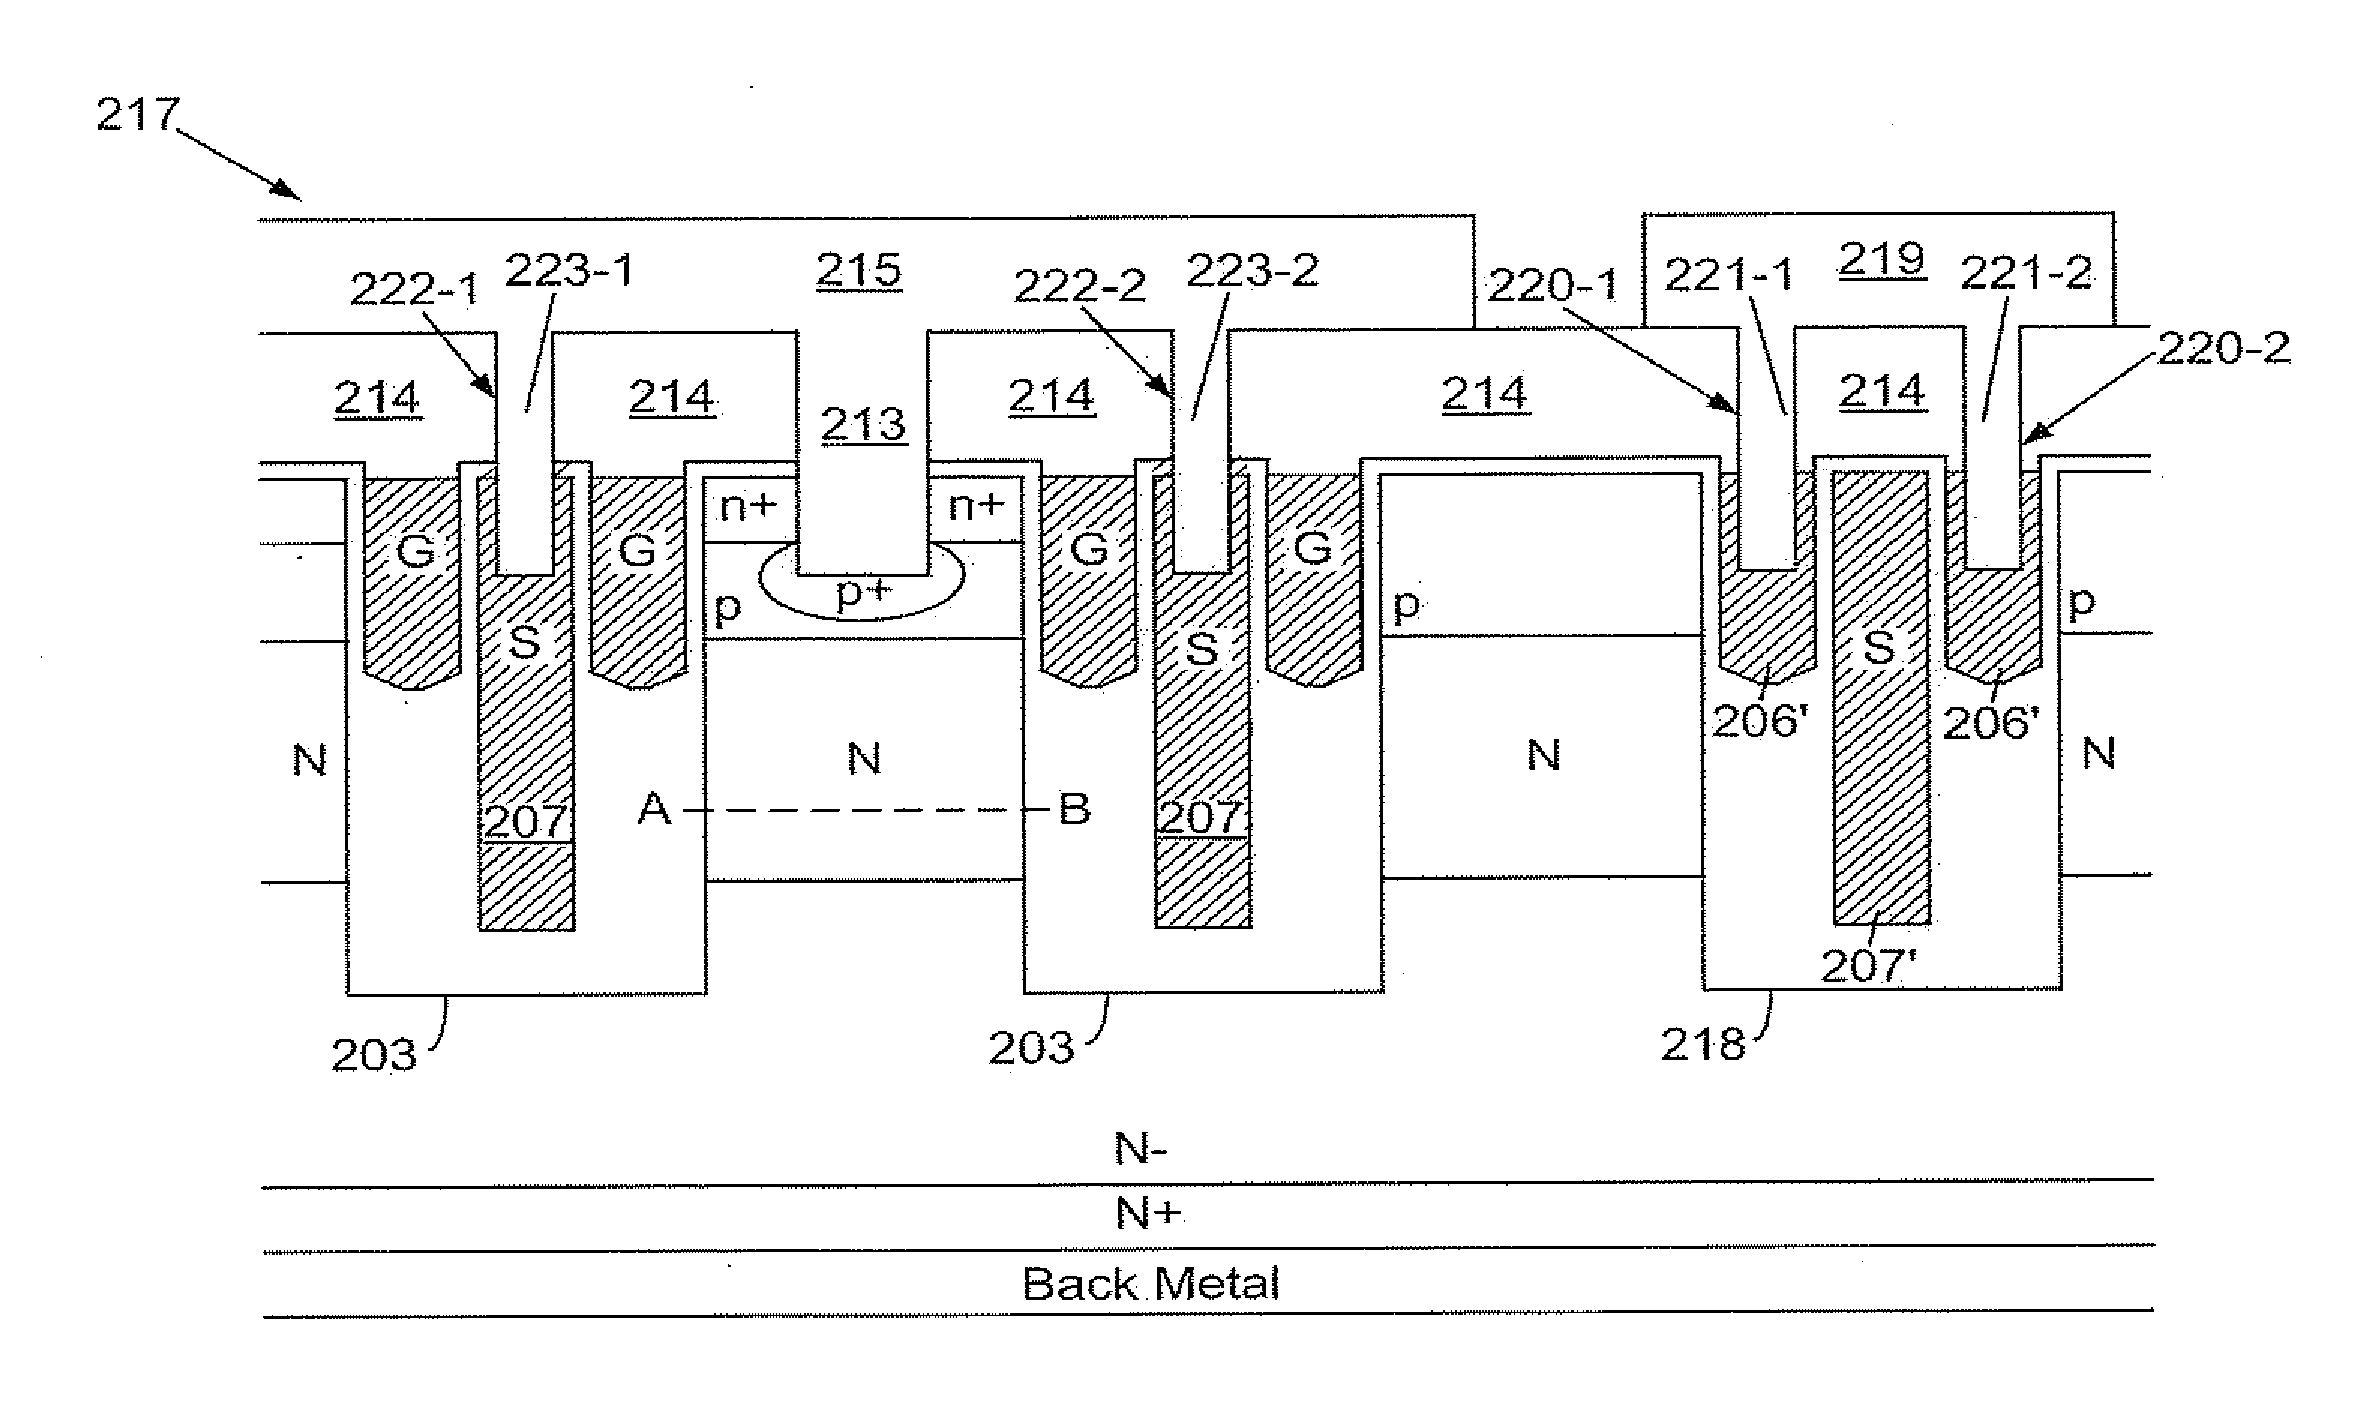 Trench mosfet with resurf stepped oxide and diffused drift region